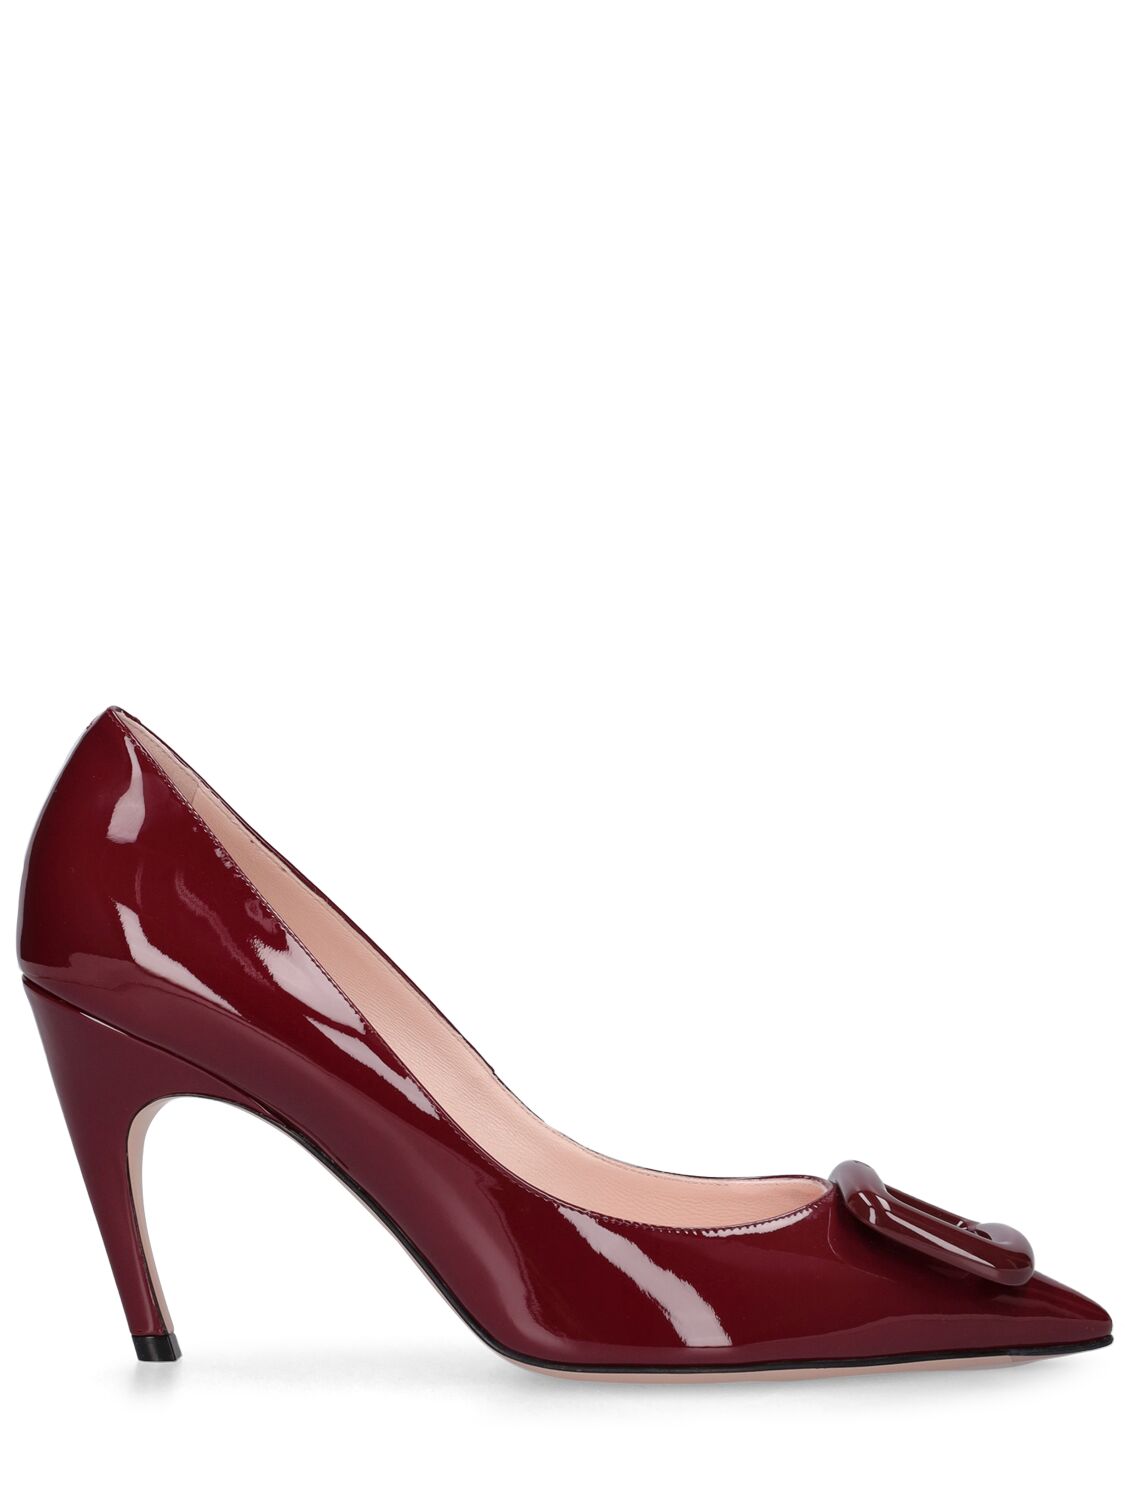 Roger Vivier 85mm Choc Patent Leather Pumps In Dark Red